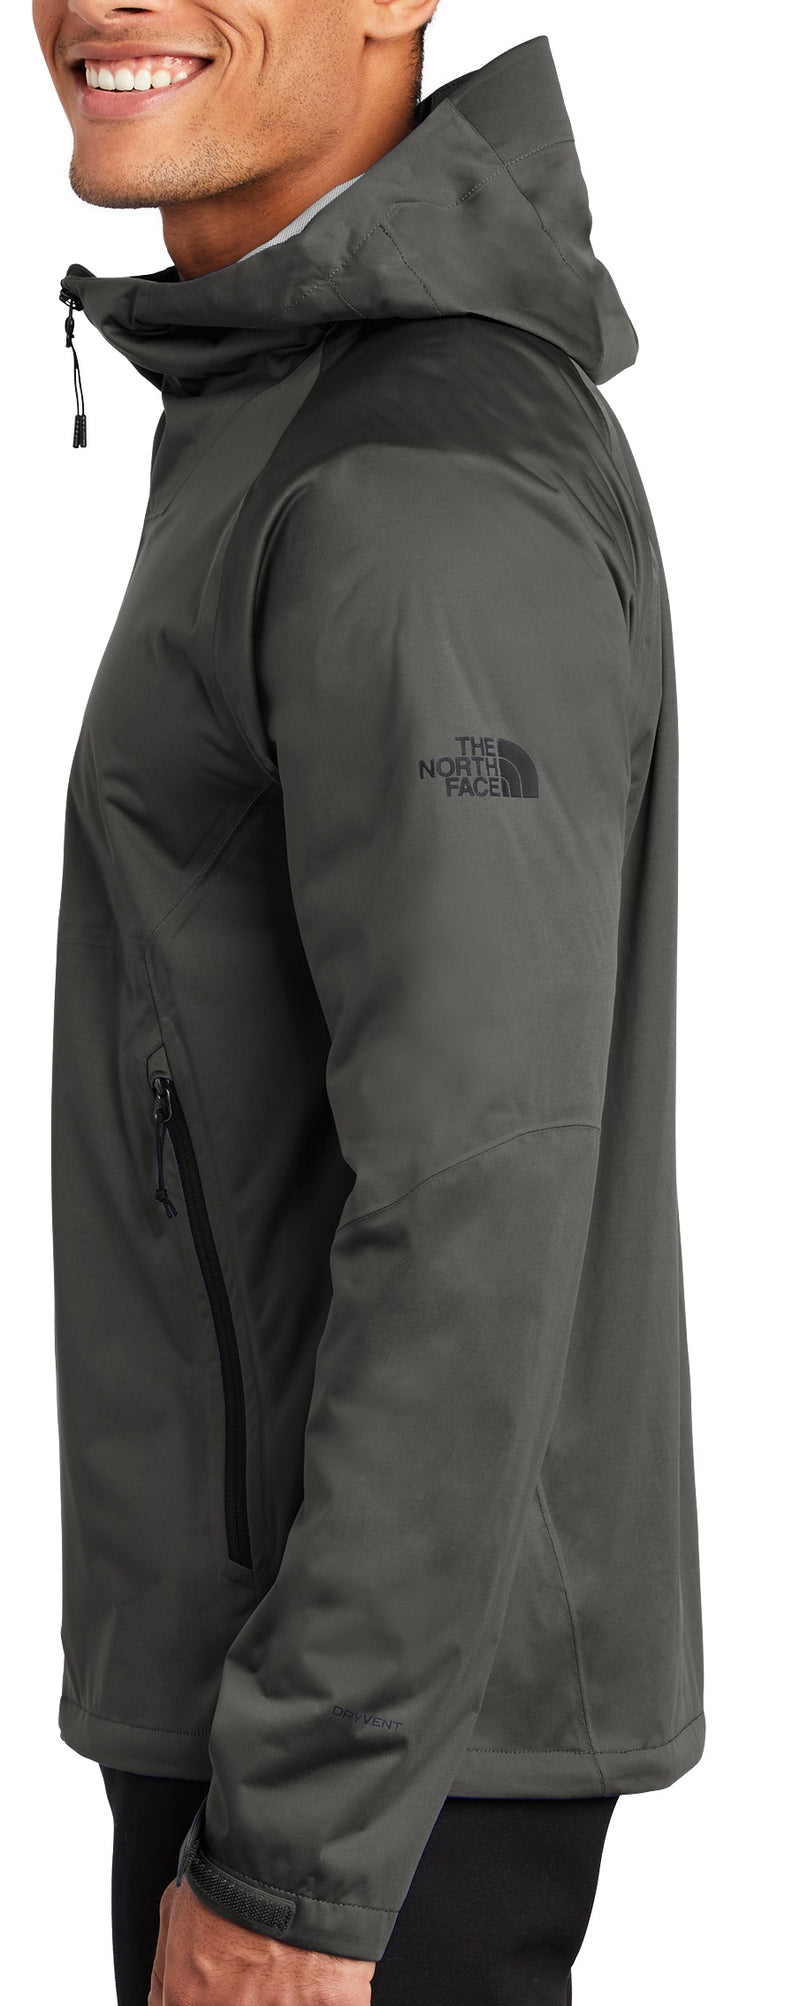 The North Face [NF0A47FG] All-Weather DryVent Stretch Jacket. Live Chat For Bulk Discounts.